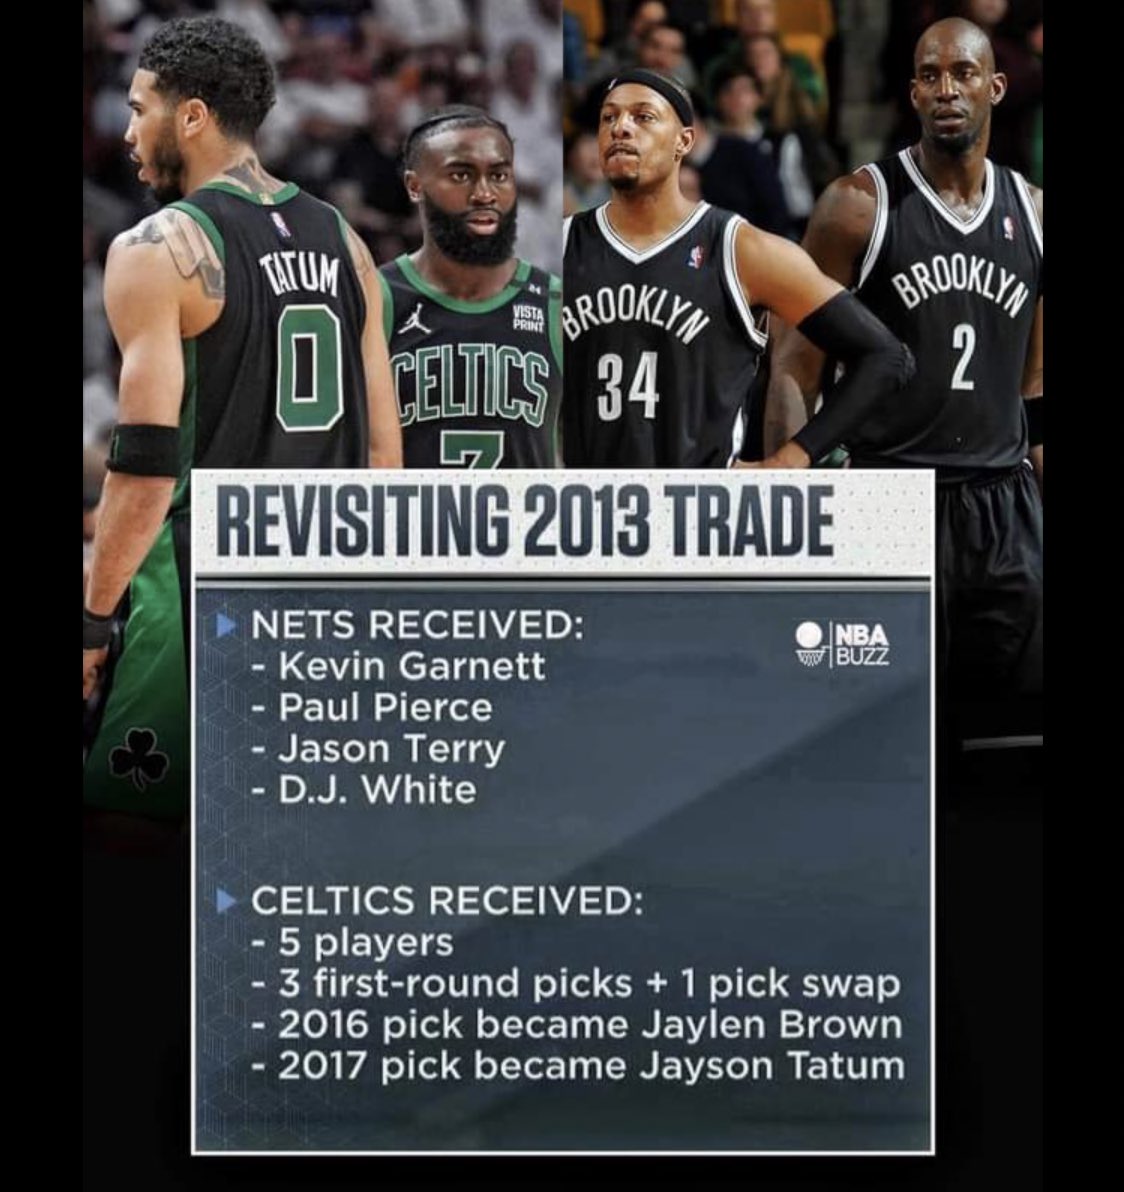 It’s the 10 year anniversary of the deal that eventually landed Jayson Tatum & Jaylen Brown in Boston. 

All Celtics fans were wary of getting rid of 2 guys that shaped Celtics culture & brought Banner 17. 

Sometimes you have to make the difficult choices to shape a franchise.